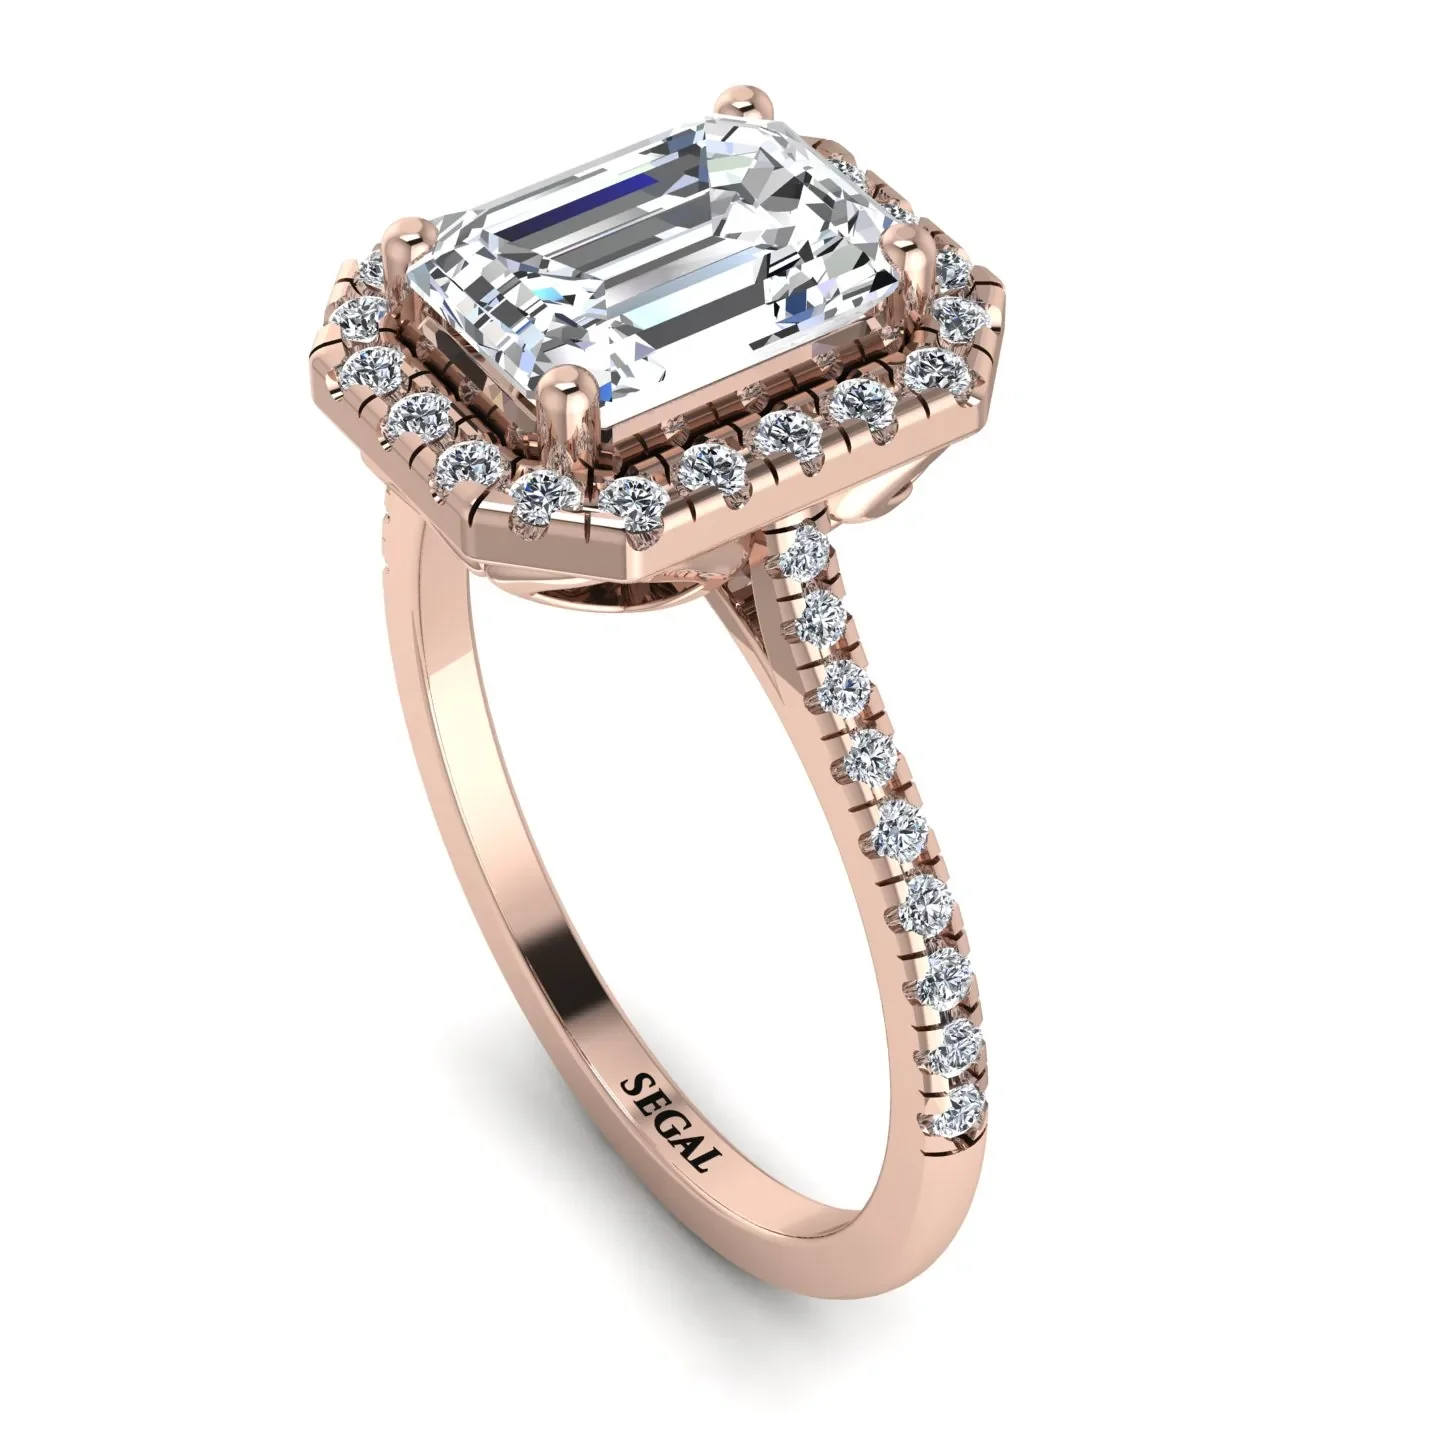 Image of Gorgeous Emerald Cut Diamond Pave Engagement Ring With Hidden Stone - Veronica No. 2